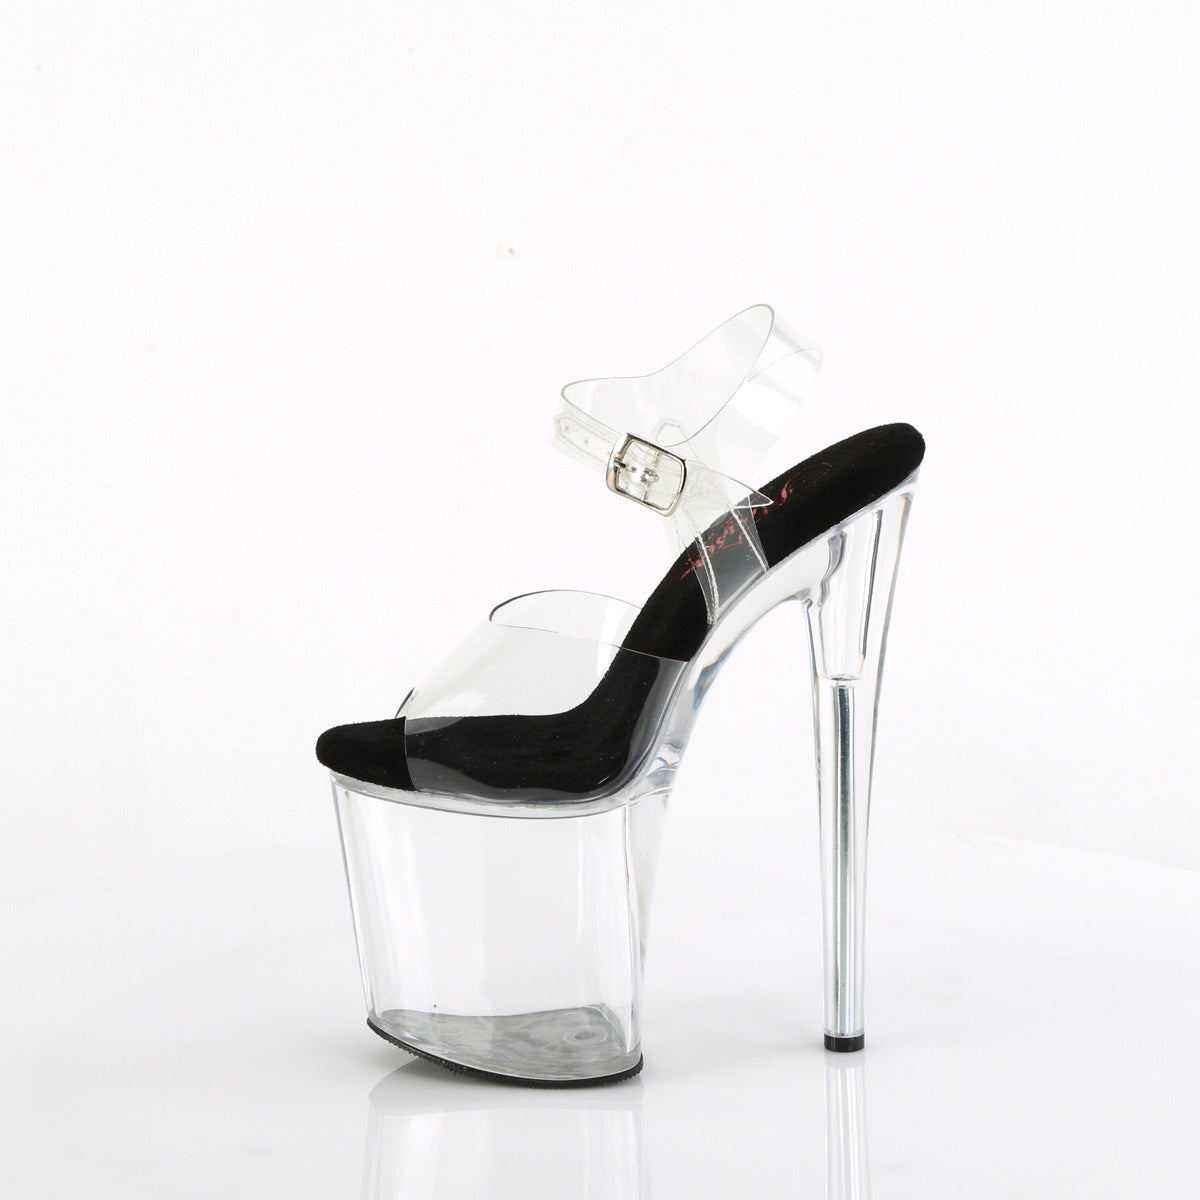 NAUGHTY-808 Pleaser Clear-Black/Clear Platform Shoes [Pole Dance Shoes]